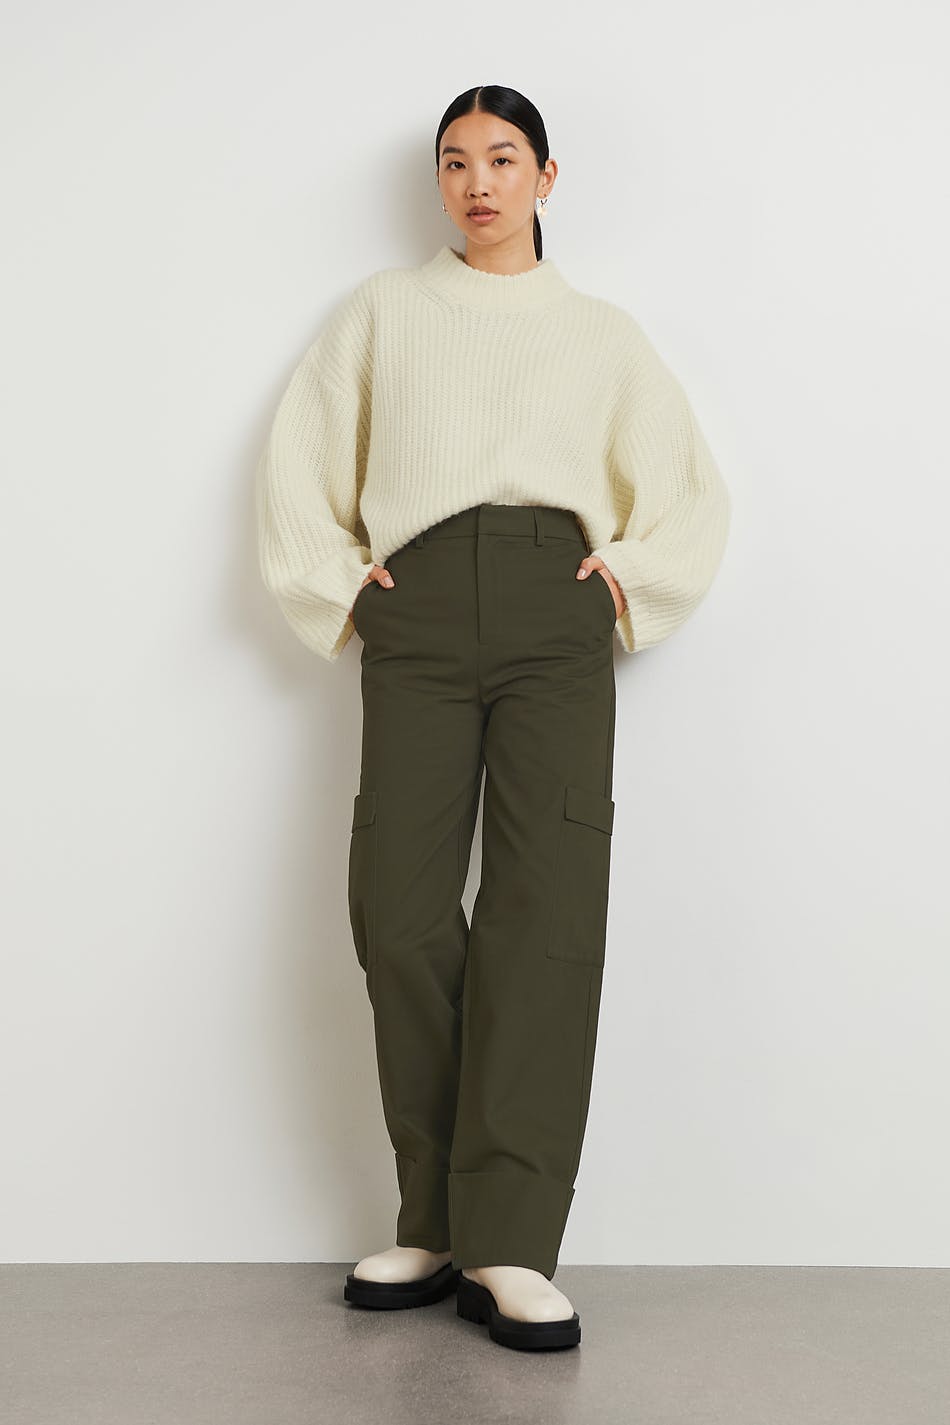 trousers - Gina Tricot